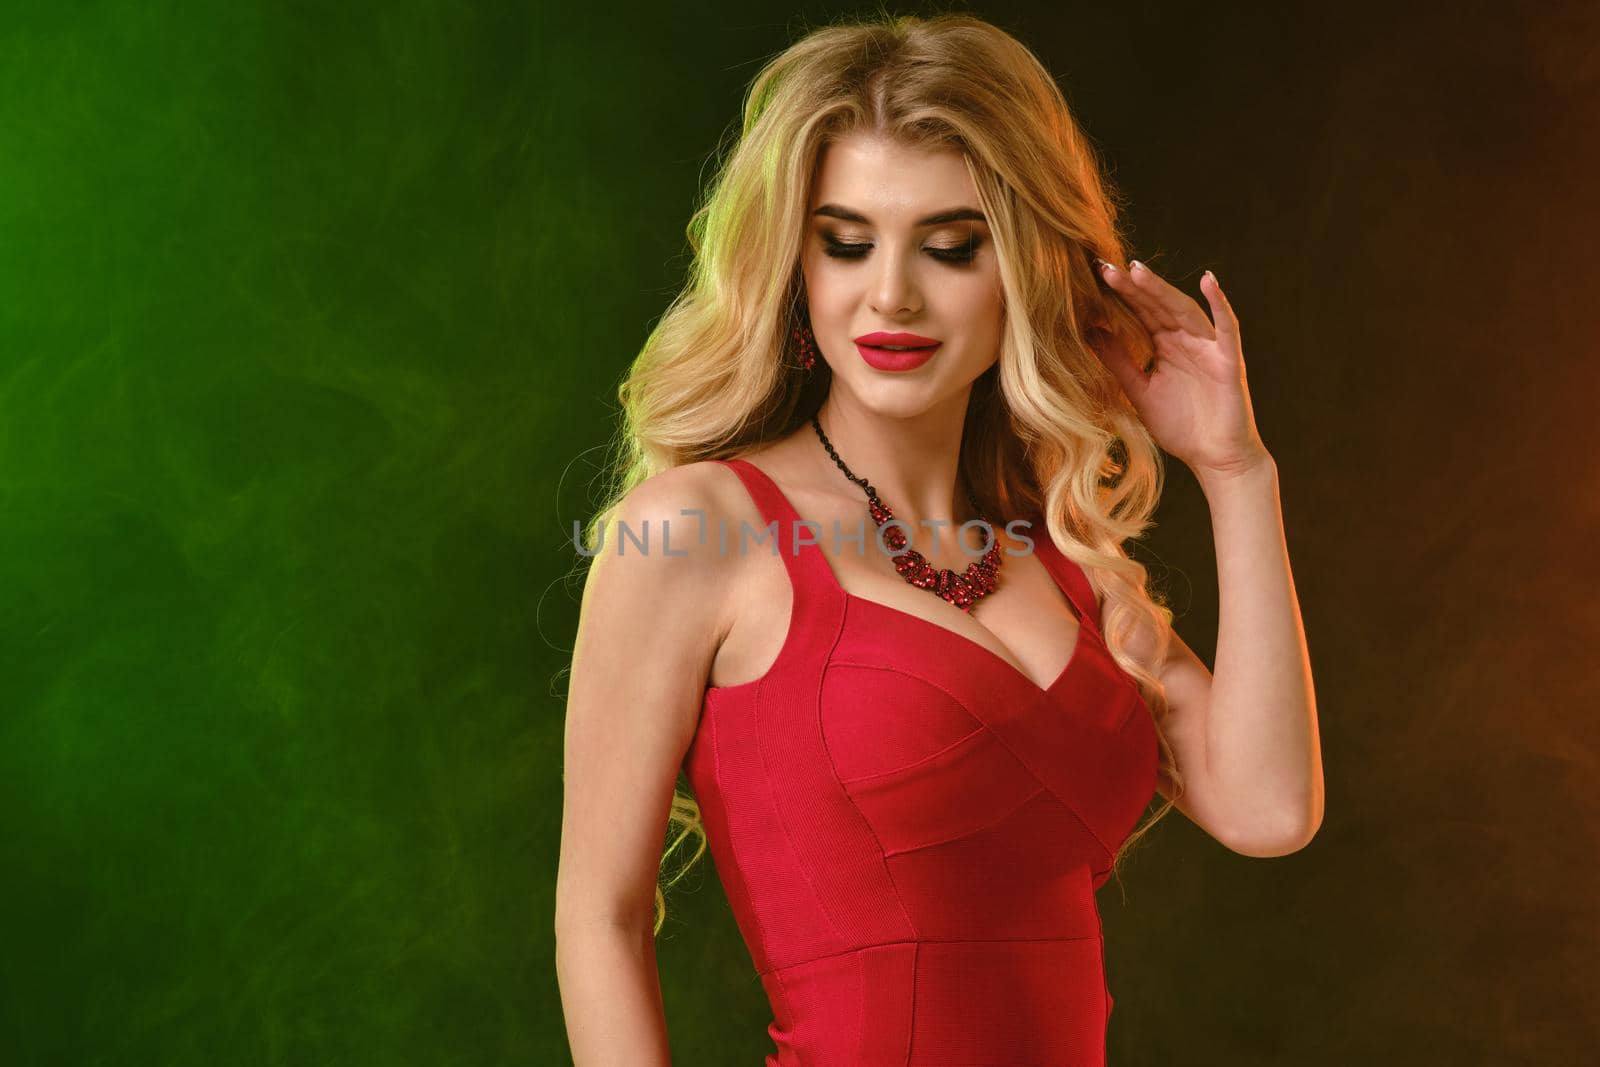 Charming curly blonde female with bright make-up, in red fitting dress and necklace. She is smiling, looking down, posing on colorful smoky studio background. Fashion and beauty. Close up, copy space